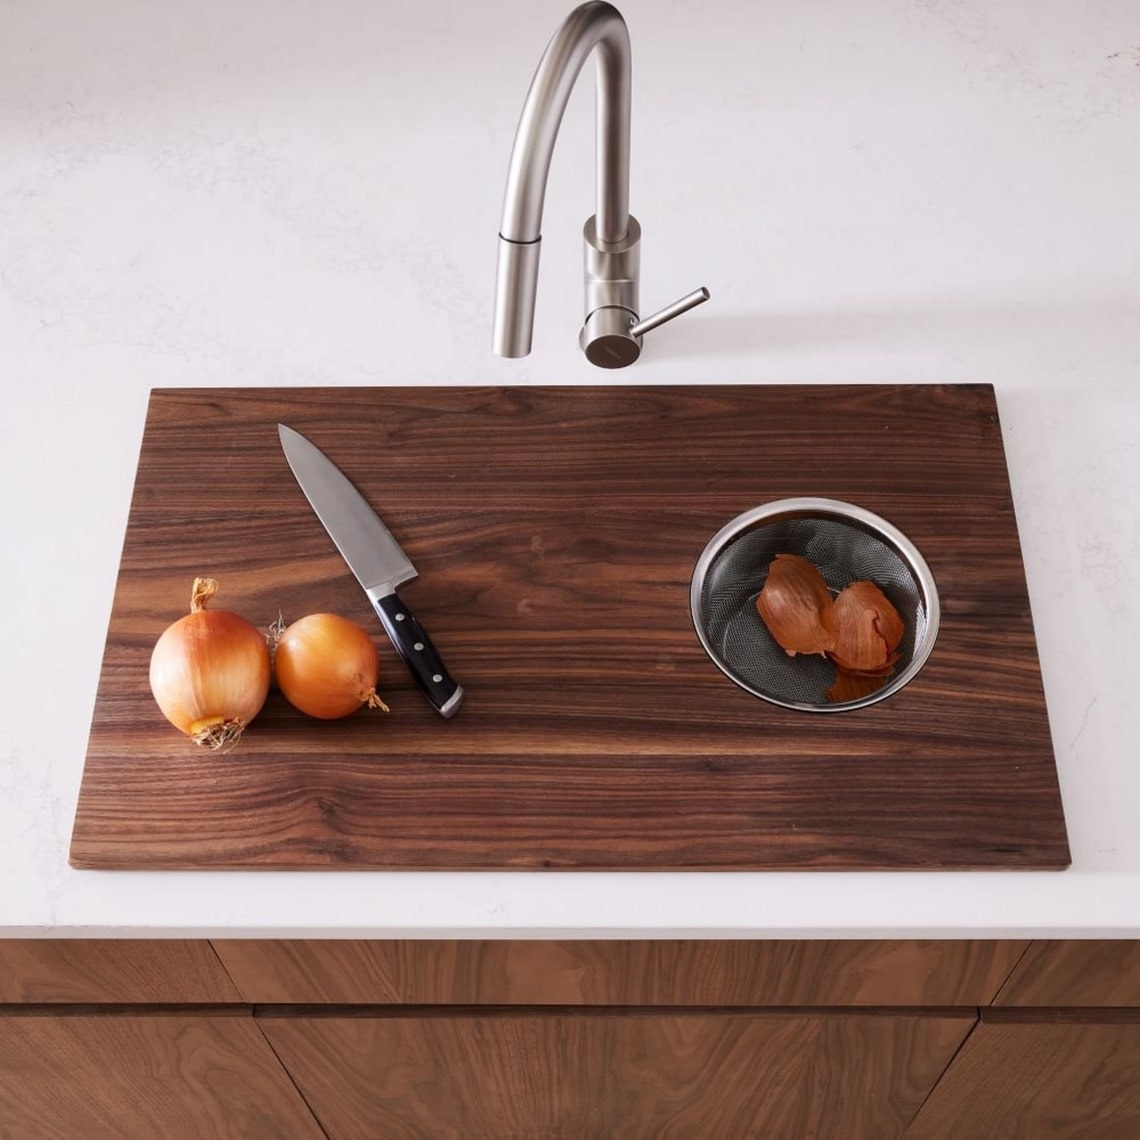 the walnut cutting board sitting over a sink, with cut onions on top